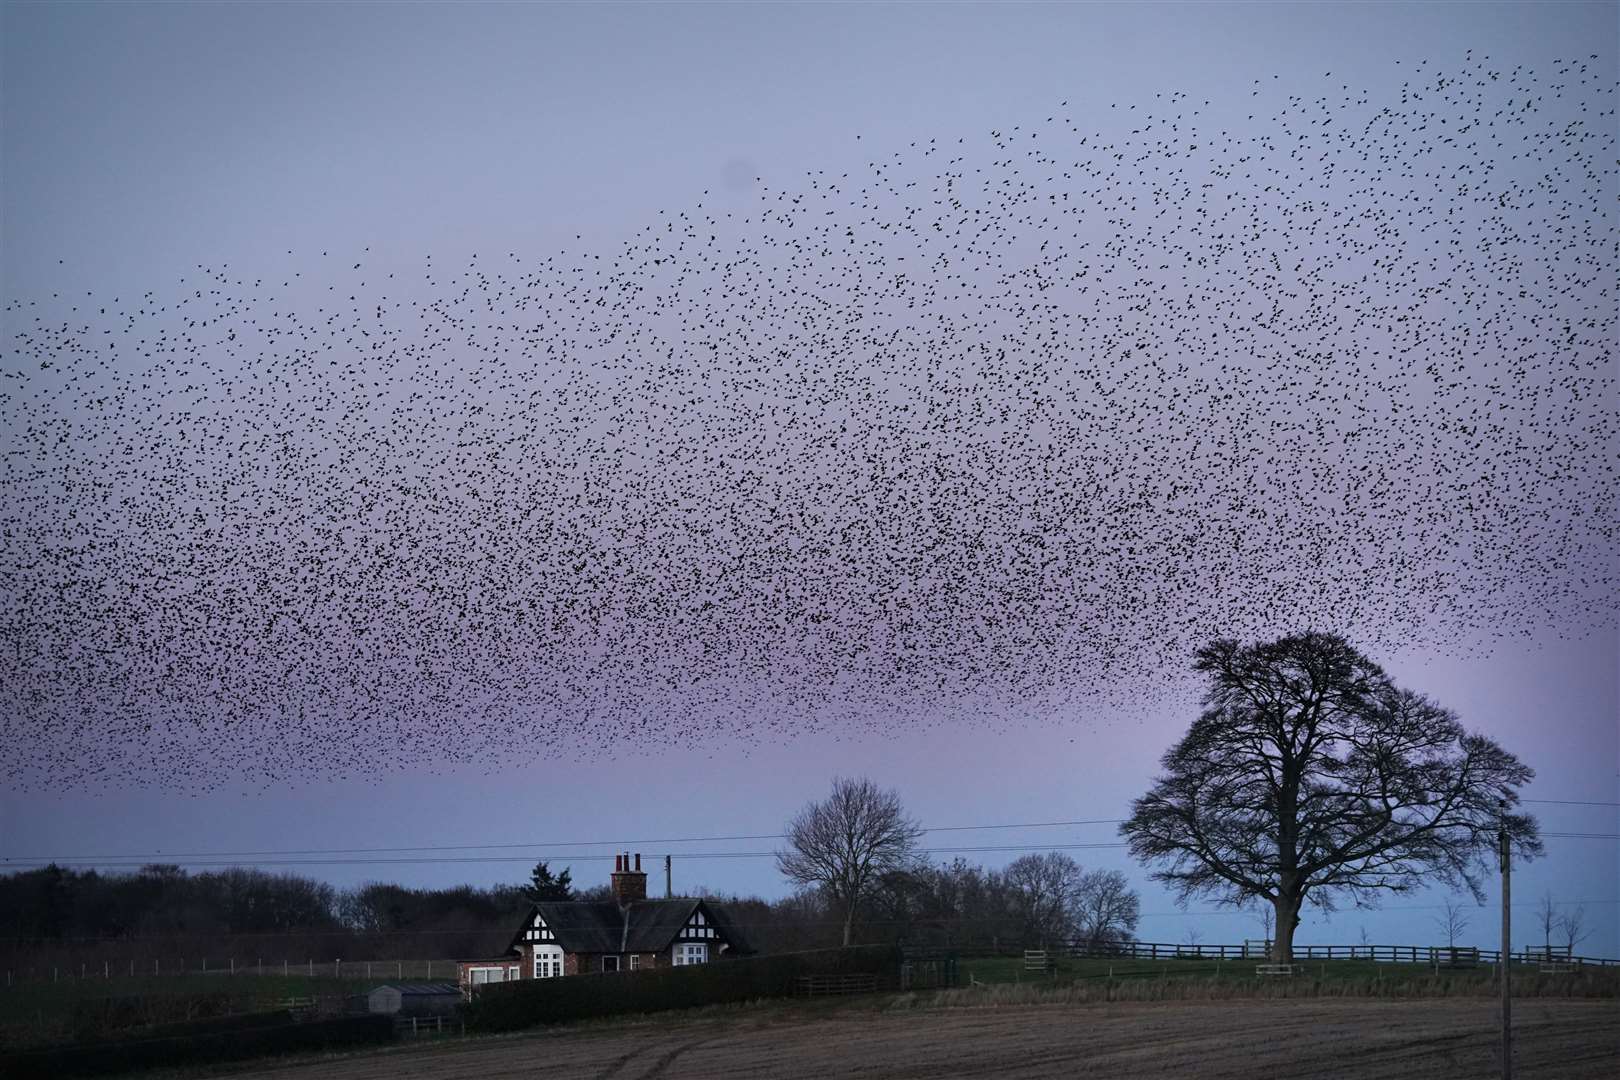 A murmuration of starlings at dusk over Catterick, North Yorkshire (Owen Humphreys/PA)